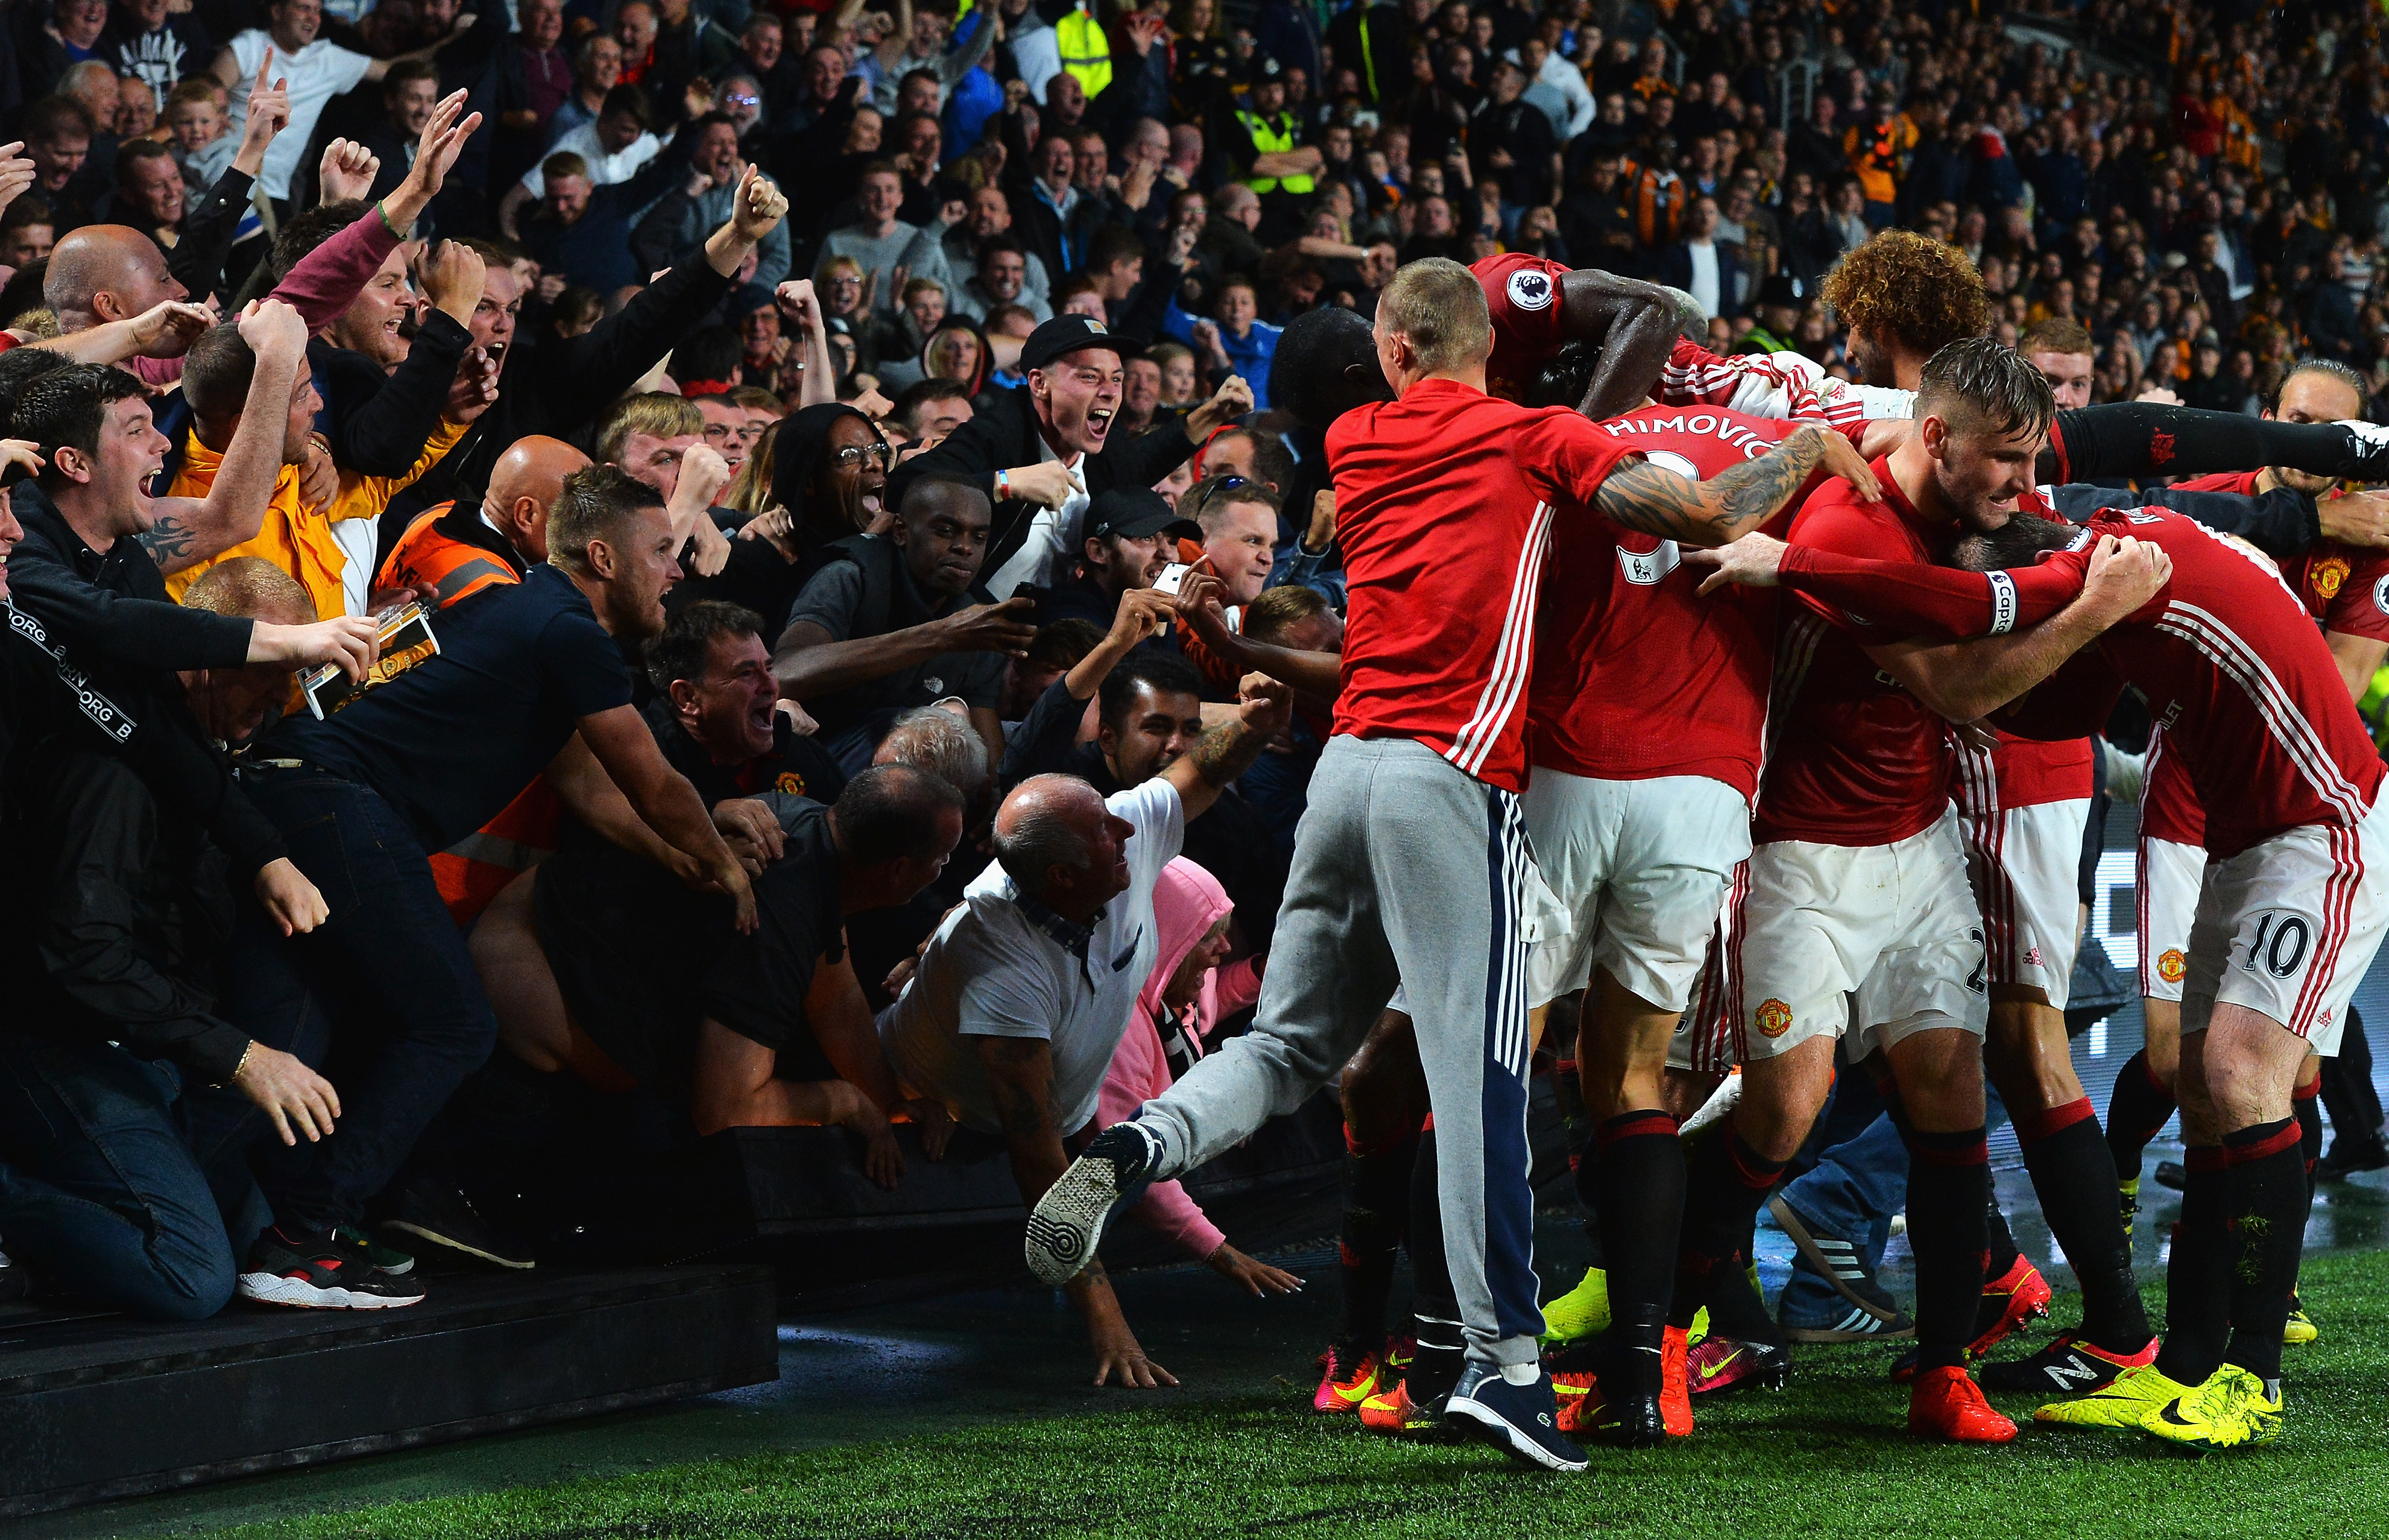 HULL, ENGLAND - AUGUST 27:  Marcus Rashford of Manchester United celebrates scoring his sides first goal with team mates and fans during the Premier League match between Hull City and Manchester United at KCOM Stadium on August 27, 2016 in Hull, England.  (Photo by Mark Runnacles/Getty Images)